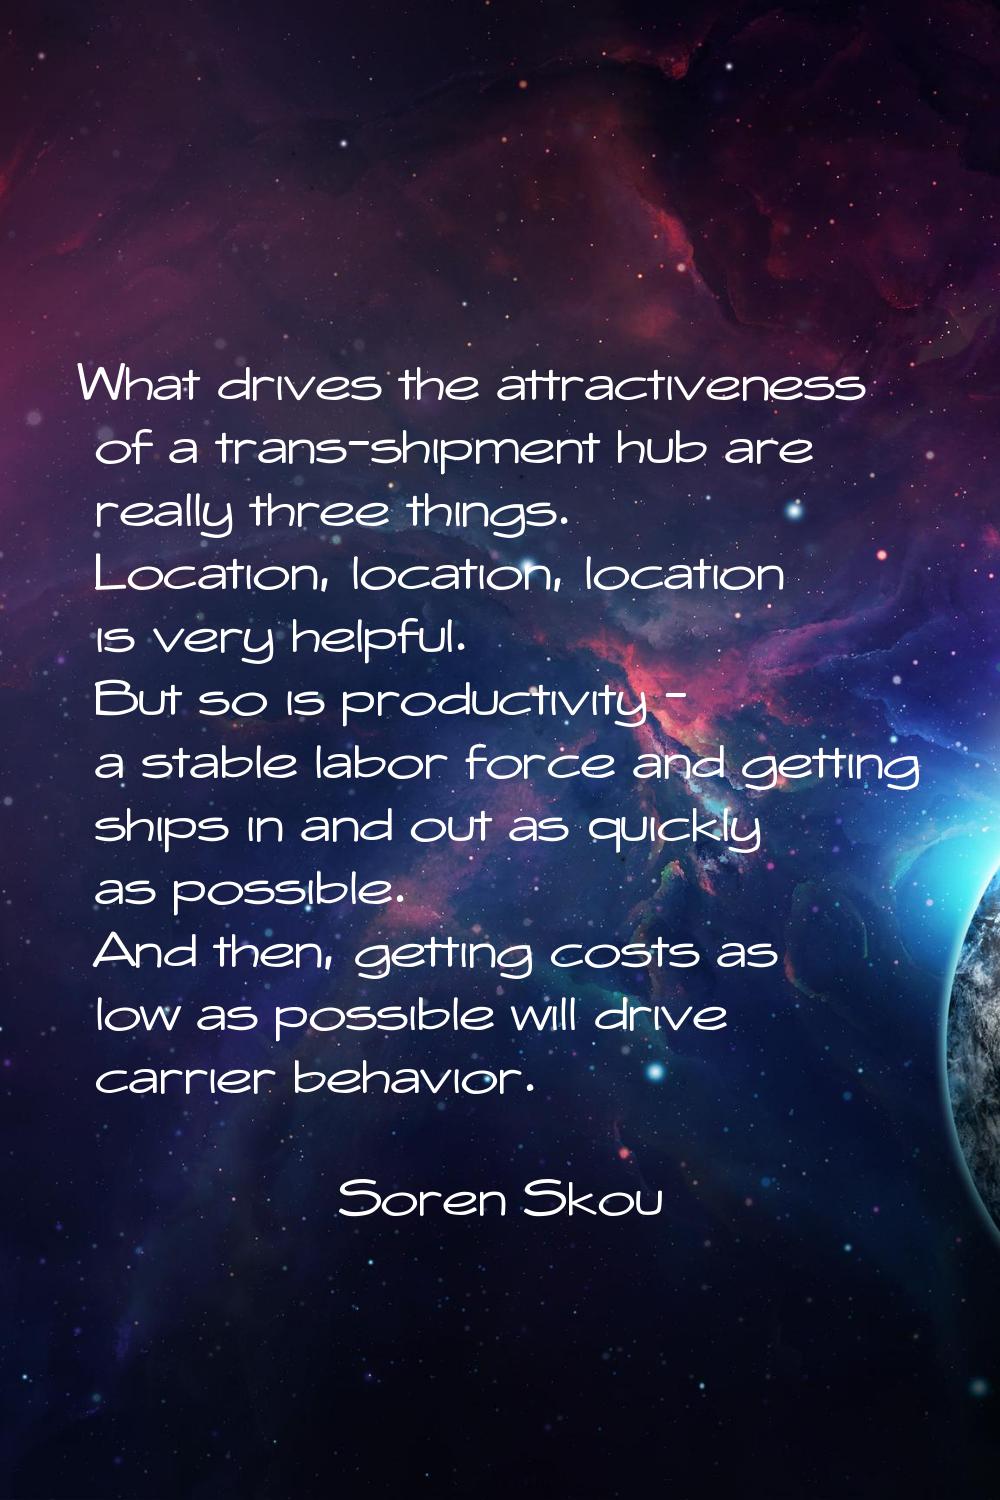 What drives the attractiveness of a trans-shipment hub are really three things. Location, location,